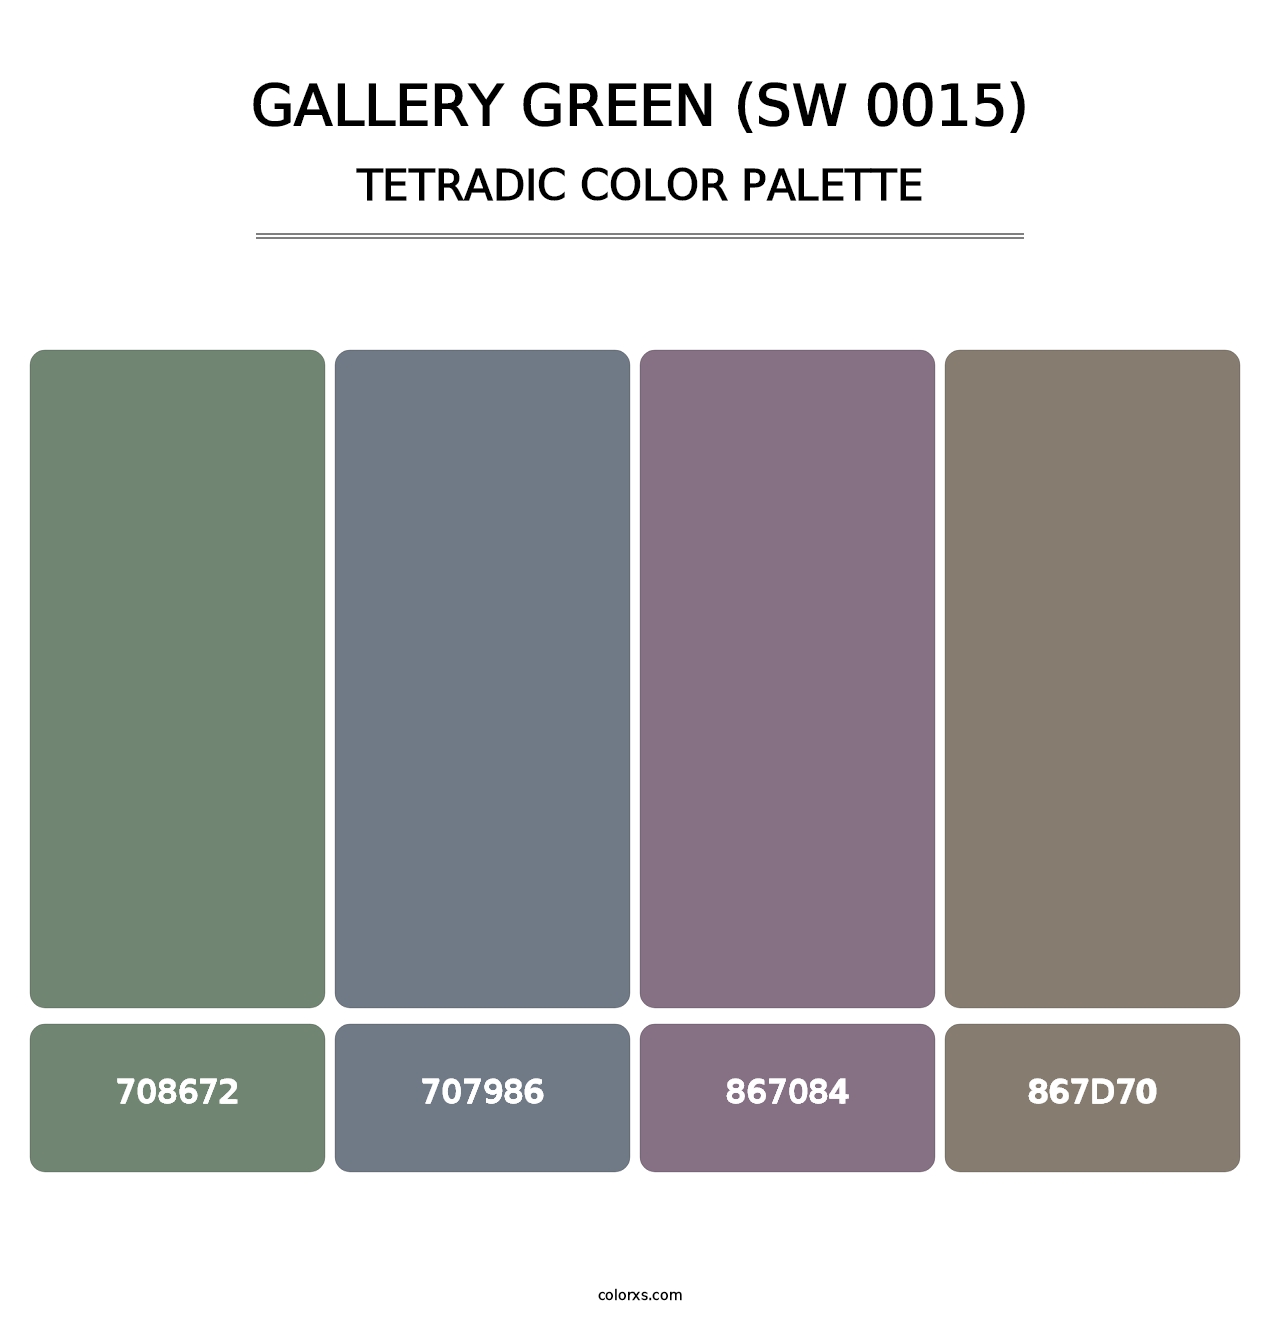 Gallery Green (SW 0015) - Tetradic Color Palette